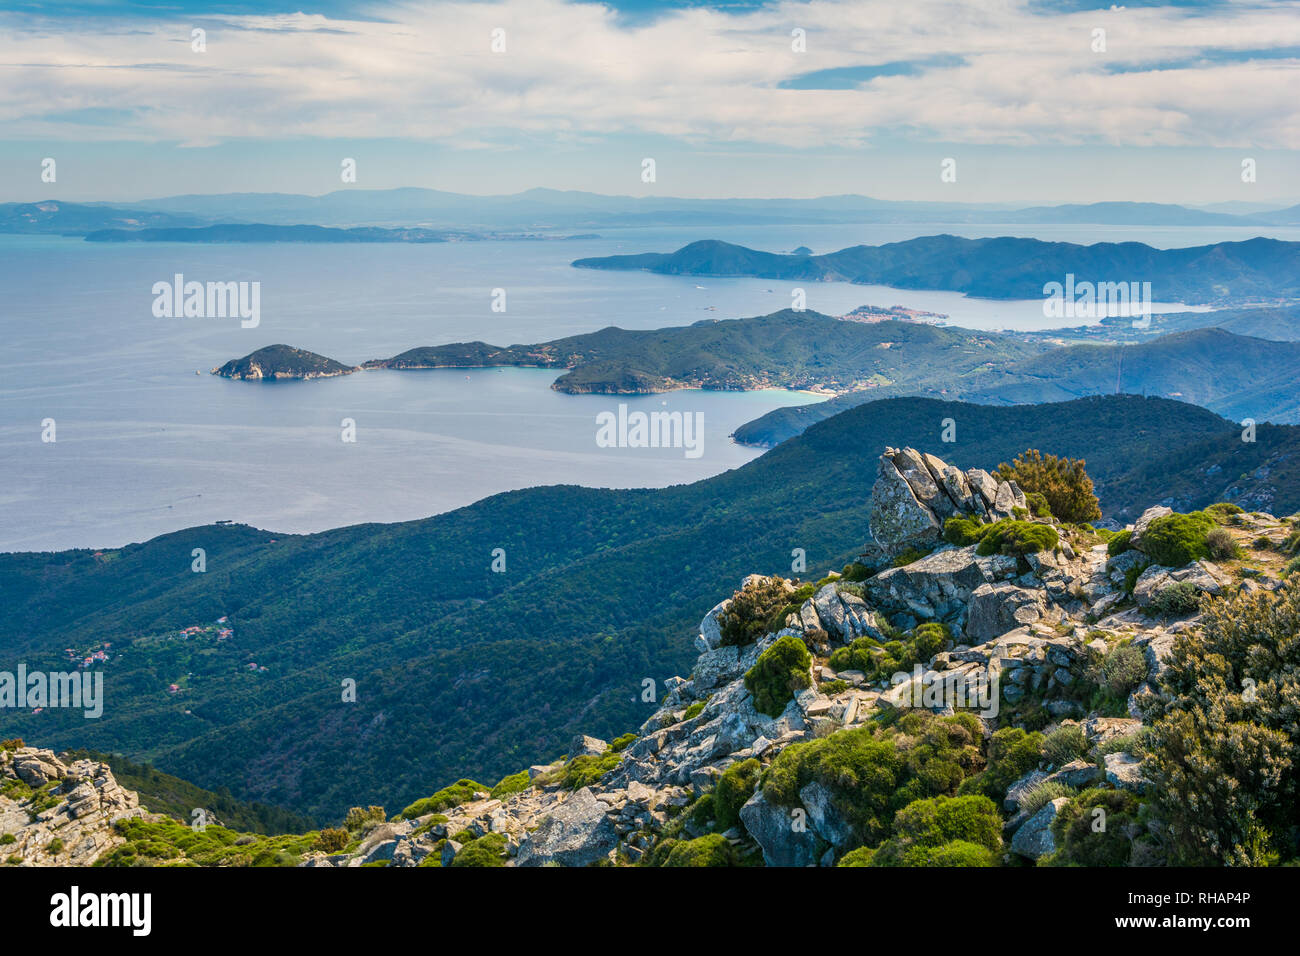 Panoramic view from the top of Capanne Mountain in Elba Island, Tuscany, Italy. Stock Photo